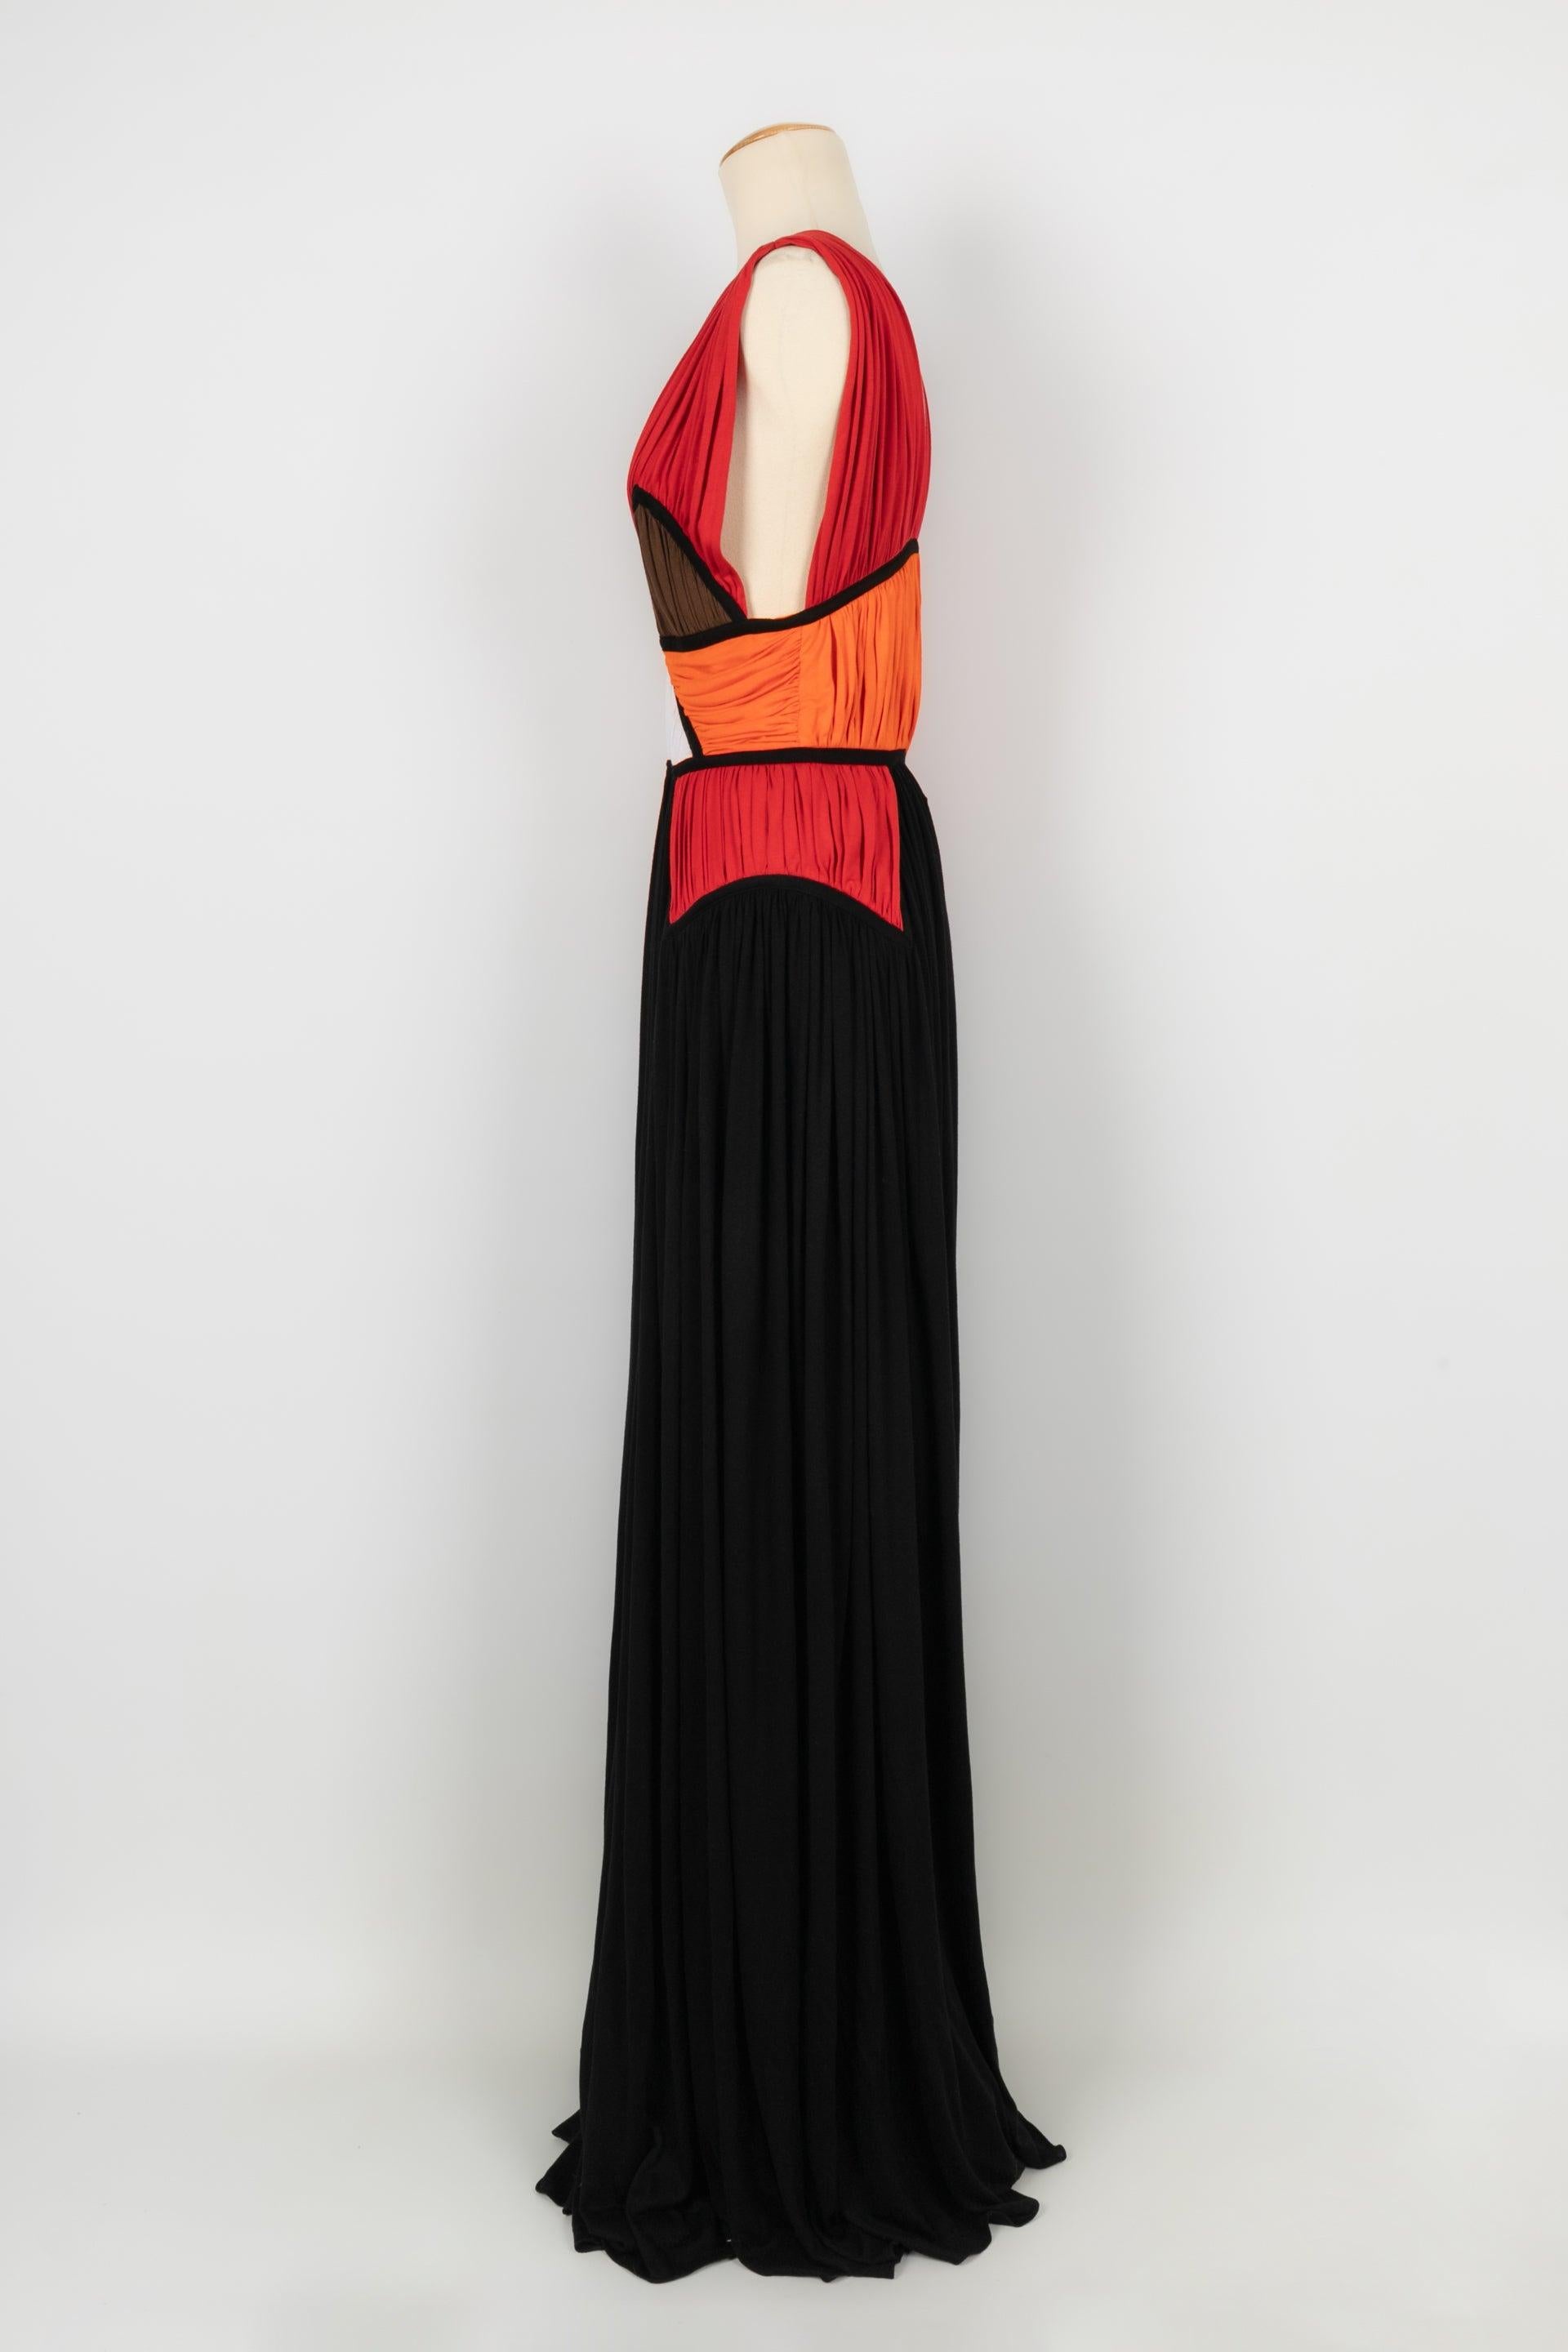 Givenchy - (Made in France) Multicolored jersey long dress. Indicated size 38FR.

Additional information:
Condition: Very good condition
Dimensions: Chest: 36 cm
Waist: 32 cm
Length: 170 cm

Seller reference: VR63